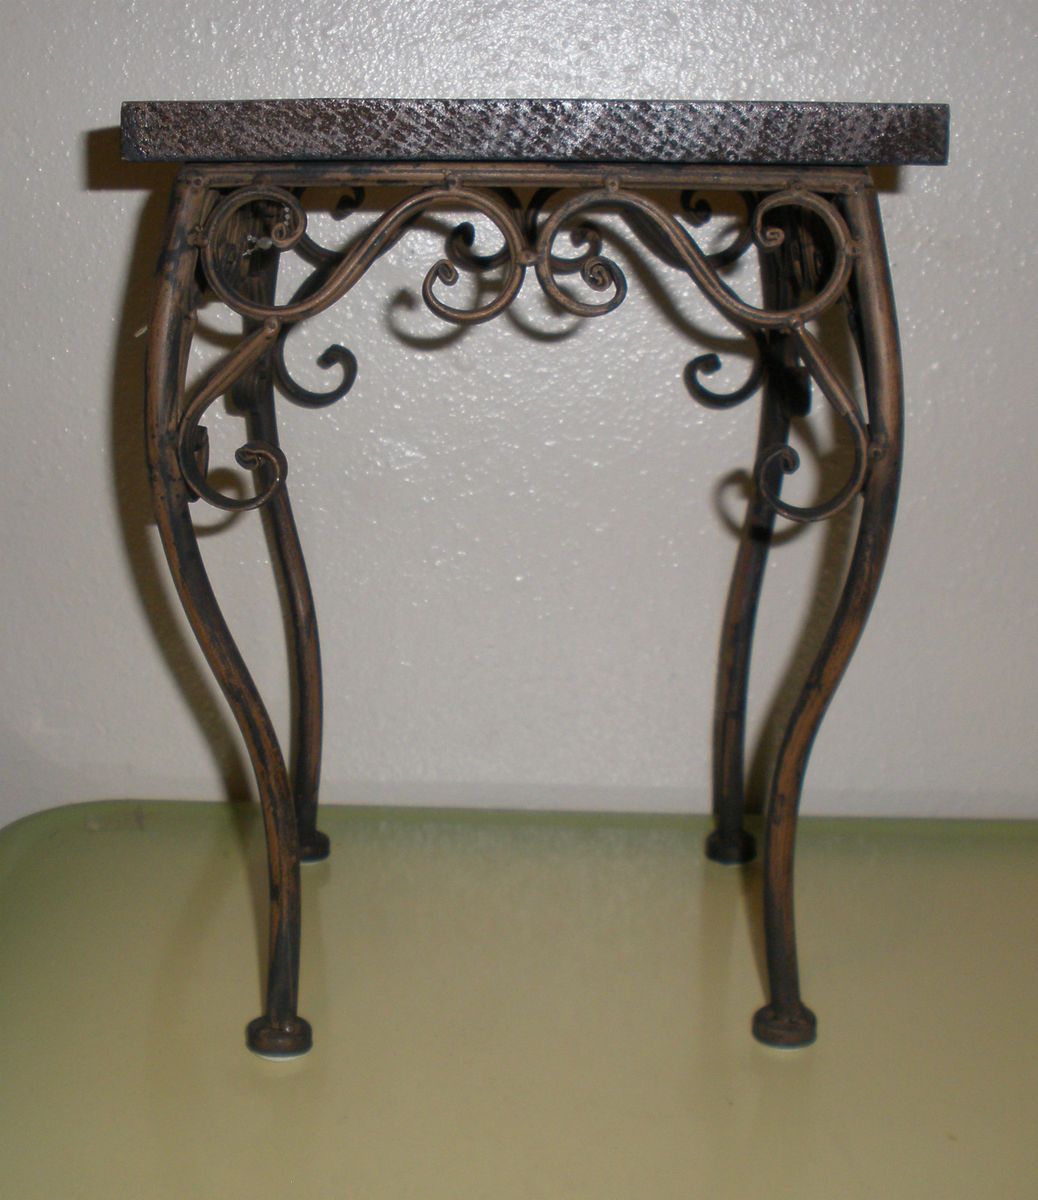 Beautiful Ornate Wooden Top Plant Stand with Metal Frame